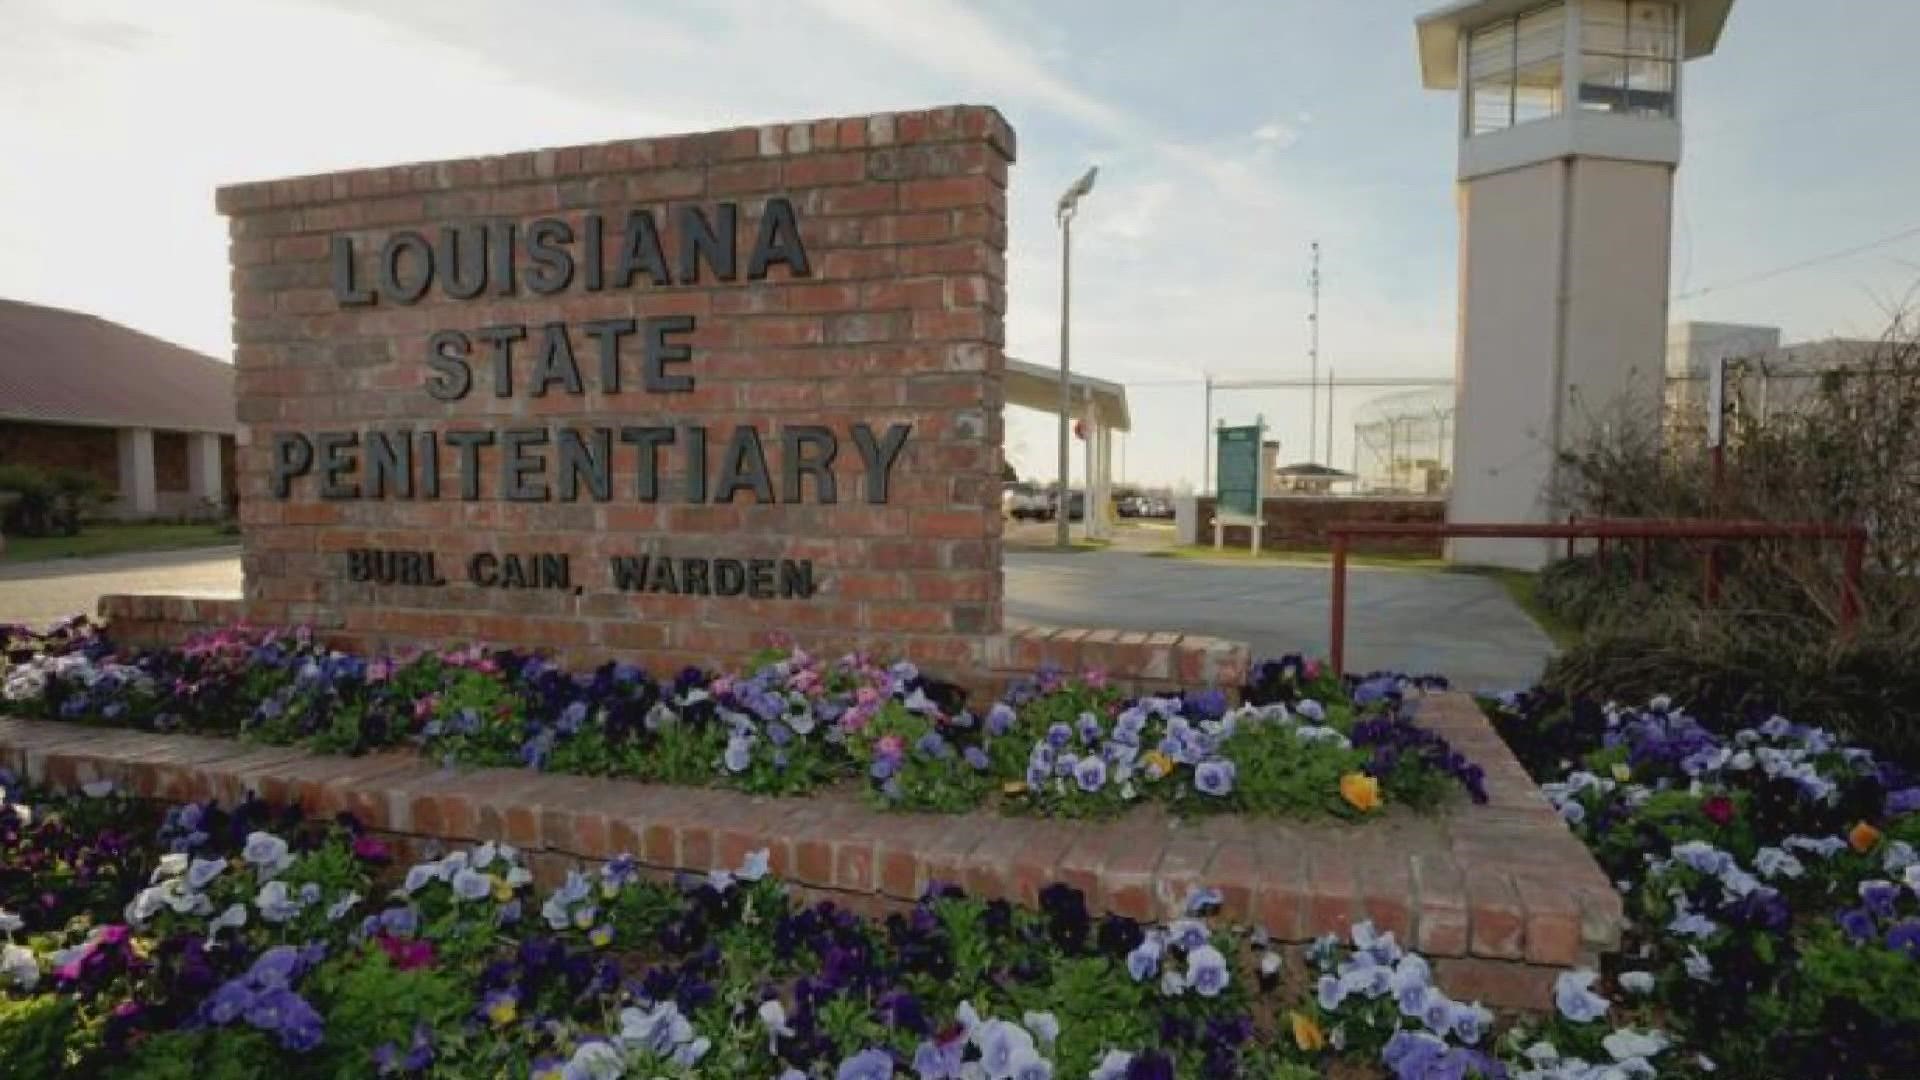 Advocates are calling for youth not to be held in the Louisiana State Penitentiary